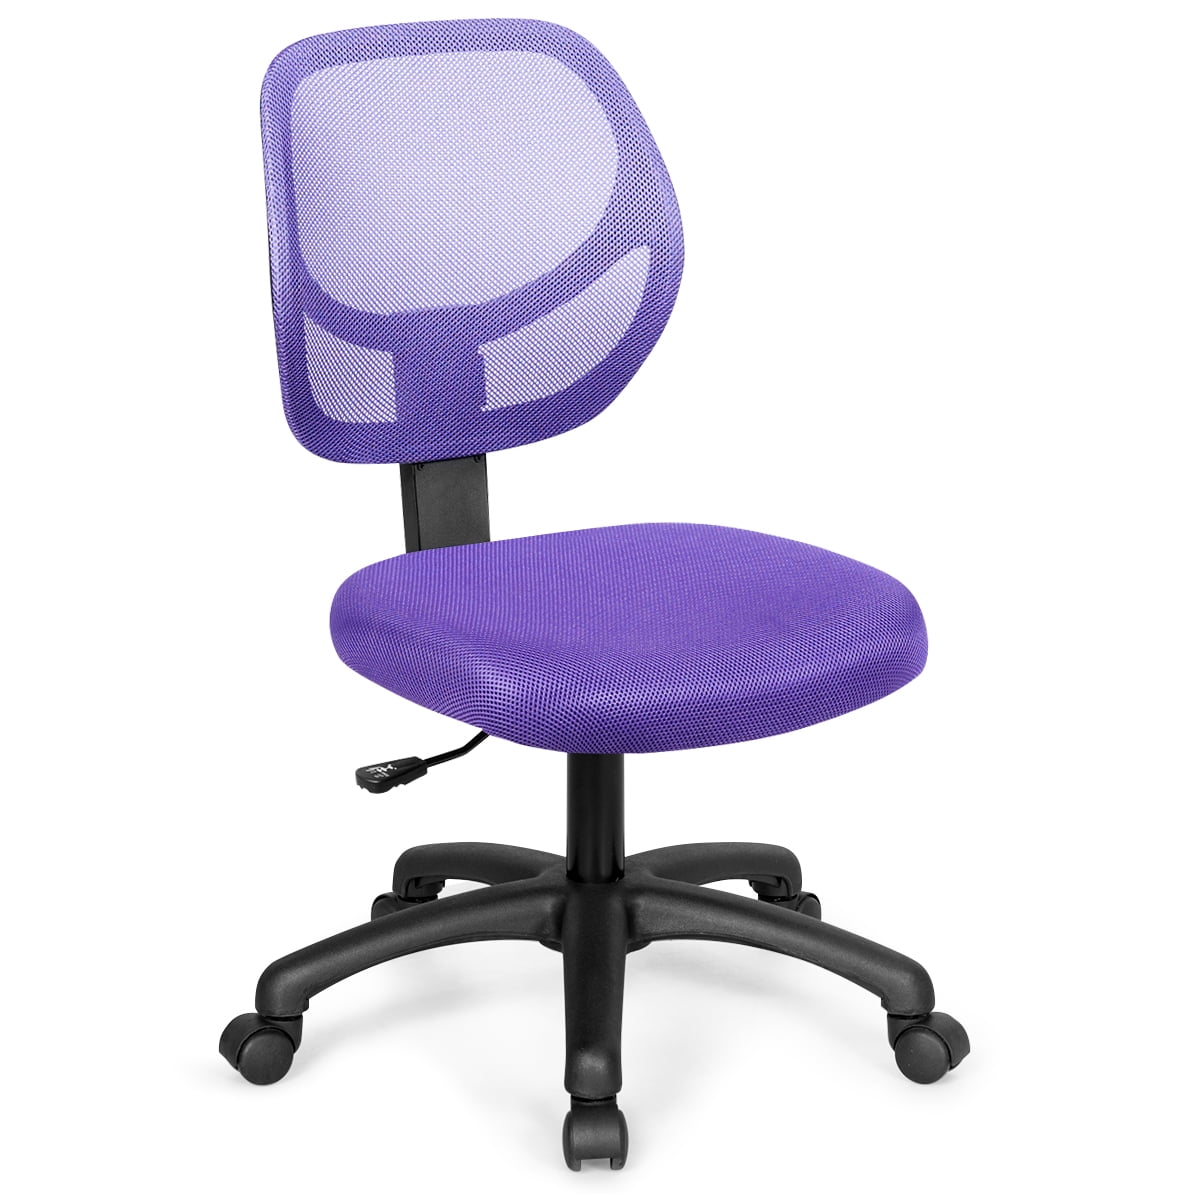 Desk Chair Adjustable Height Purple, Purple Office Chairs With Arms